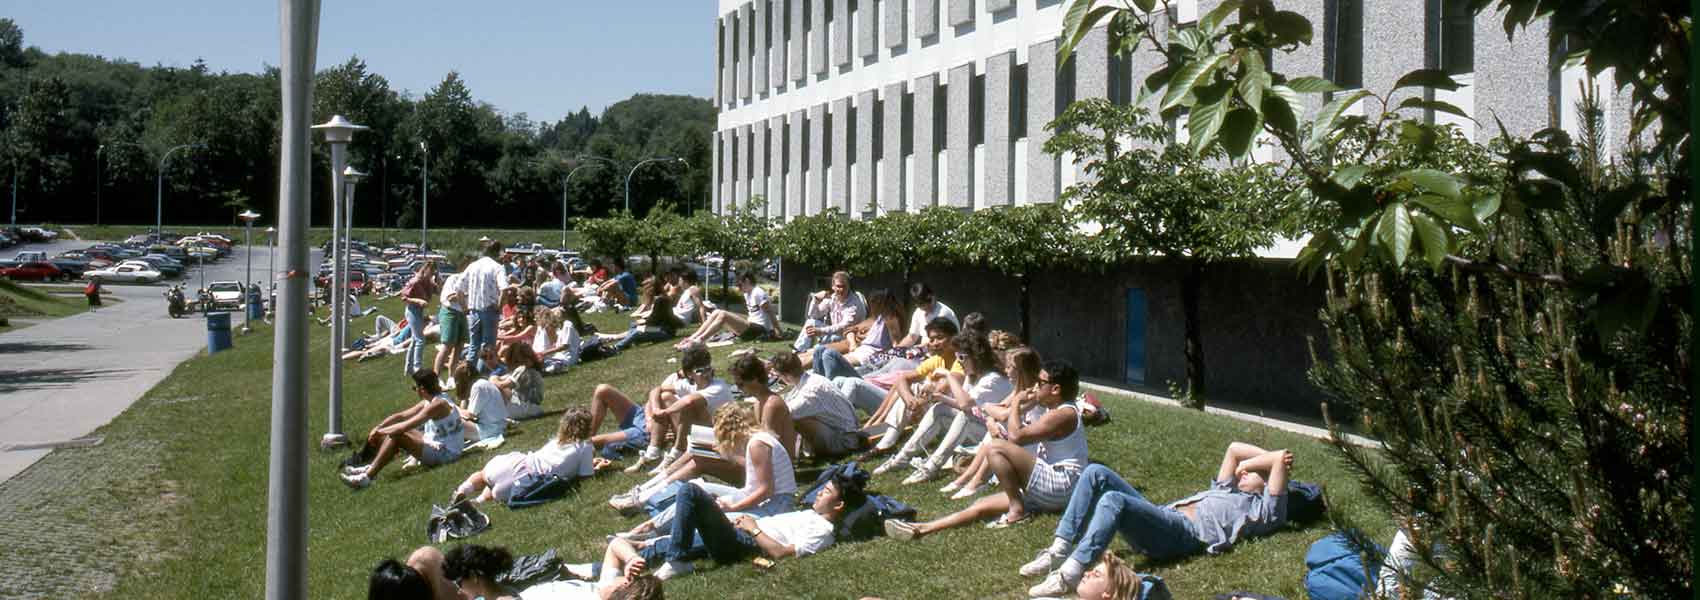 Students lying on a grassy hill on campus on a sunny day.